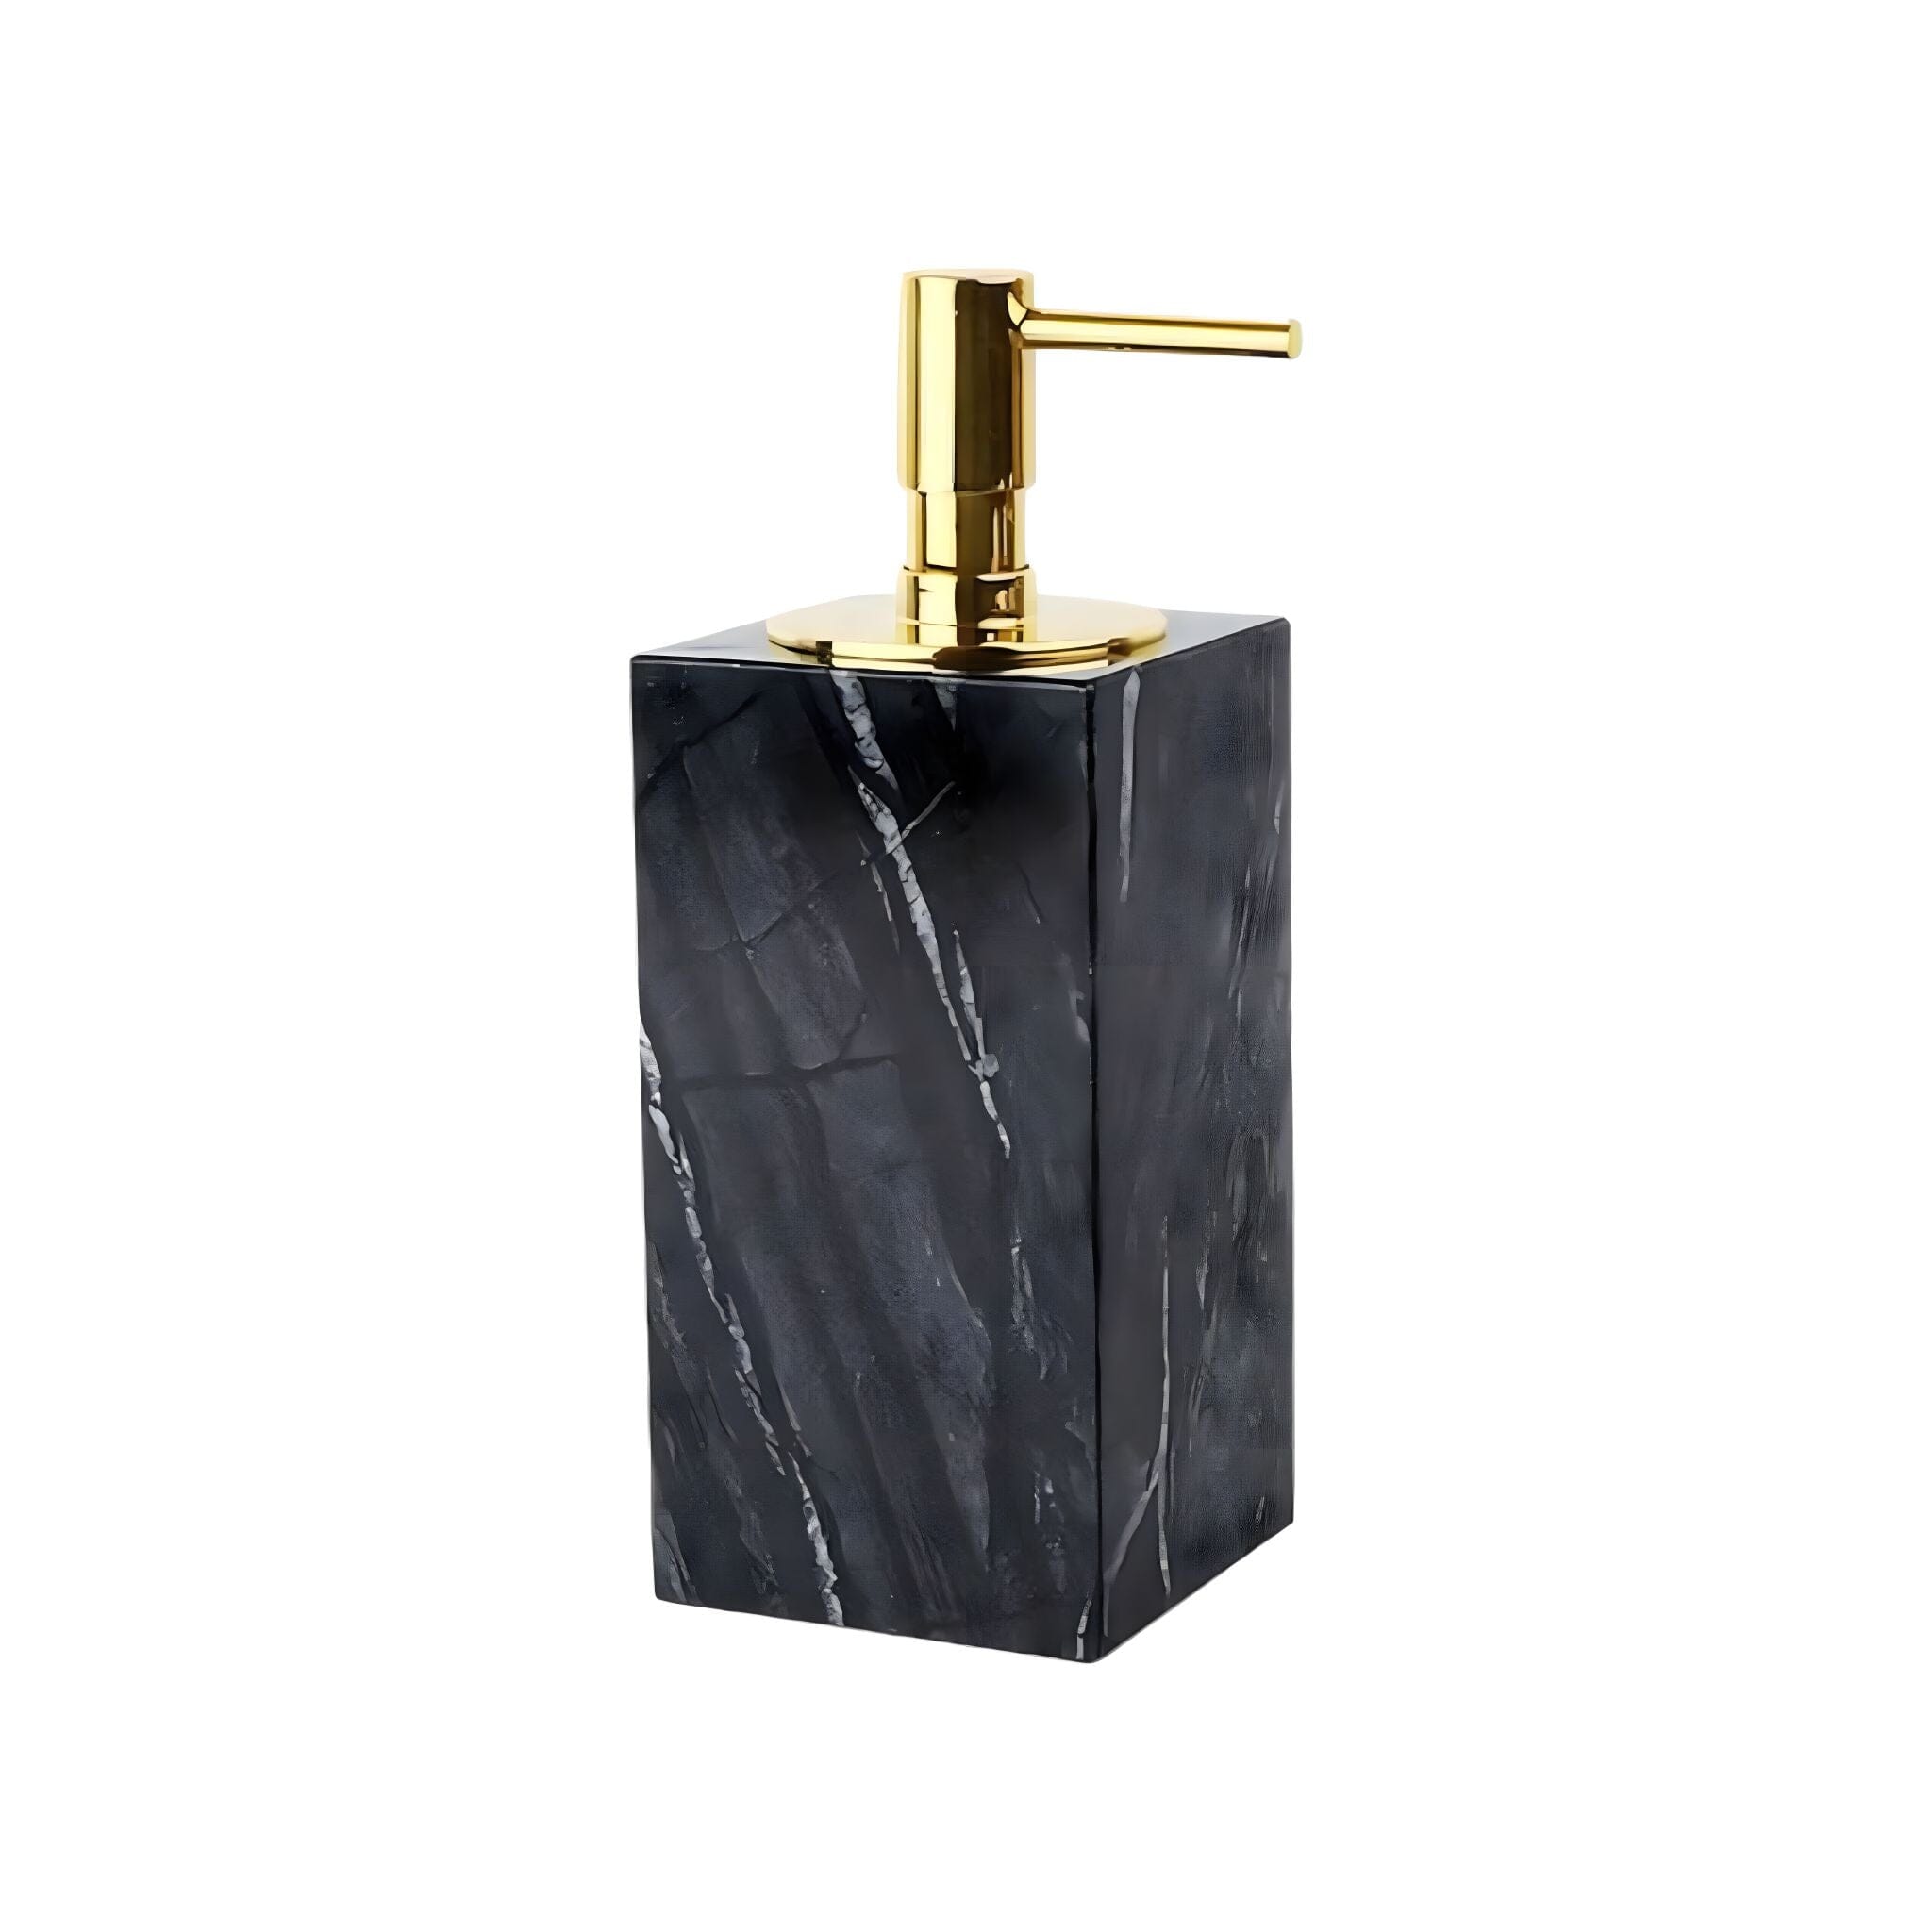 Claude Marble Bathroom Accessories Collection Bathroom Accessories Soap Dispenser (gold) 